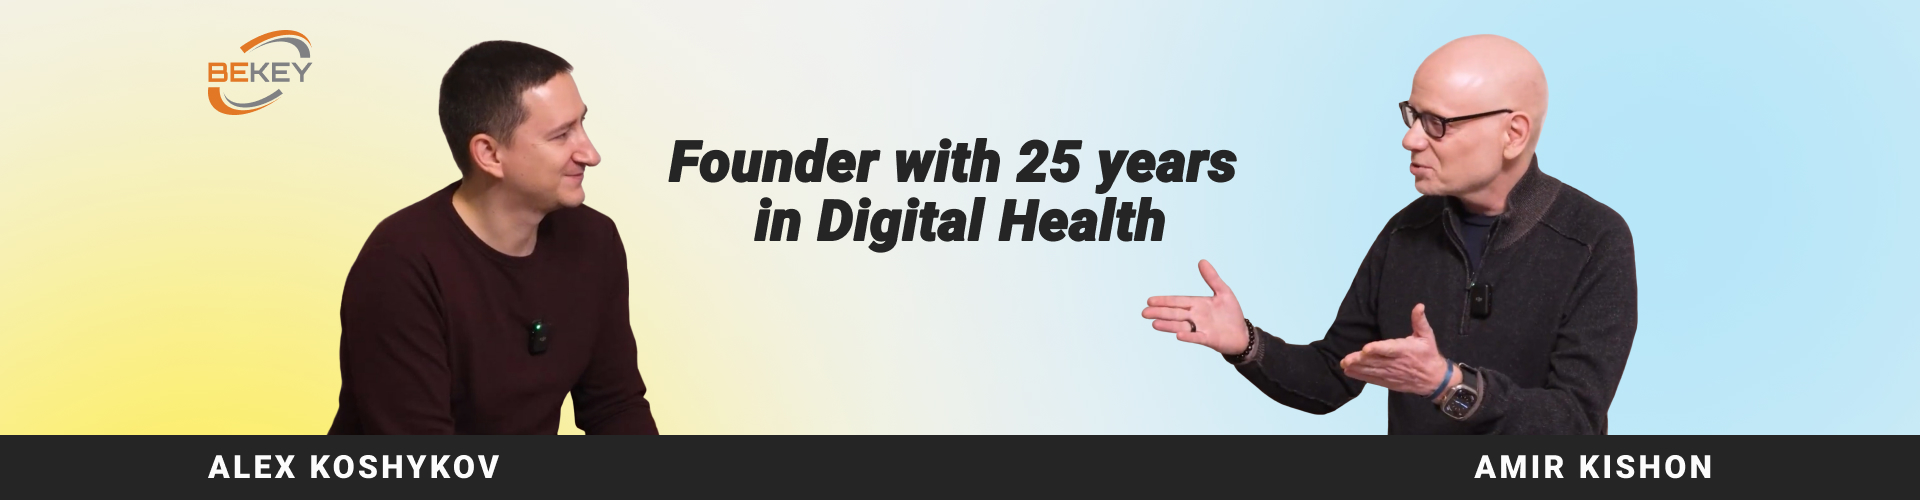 Founder with 25 Years of Experience in Digital Health. Digital Health Interviews: Amir Kishon - image